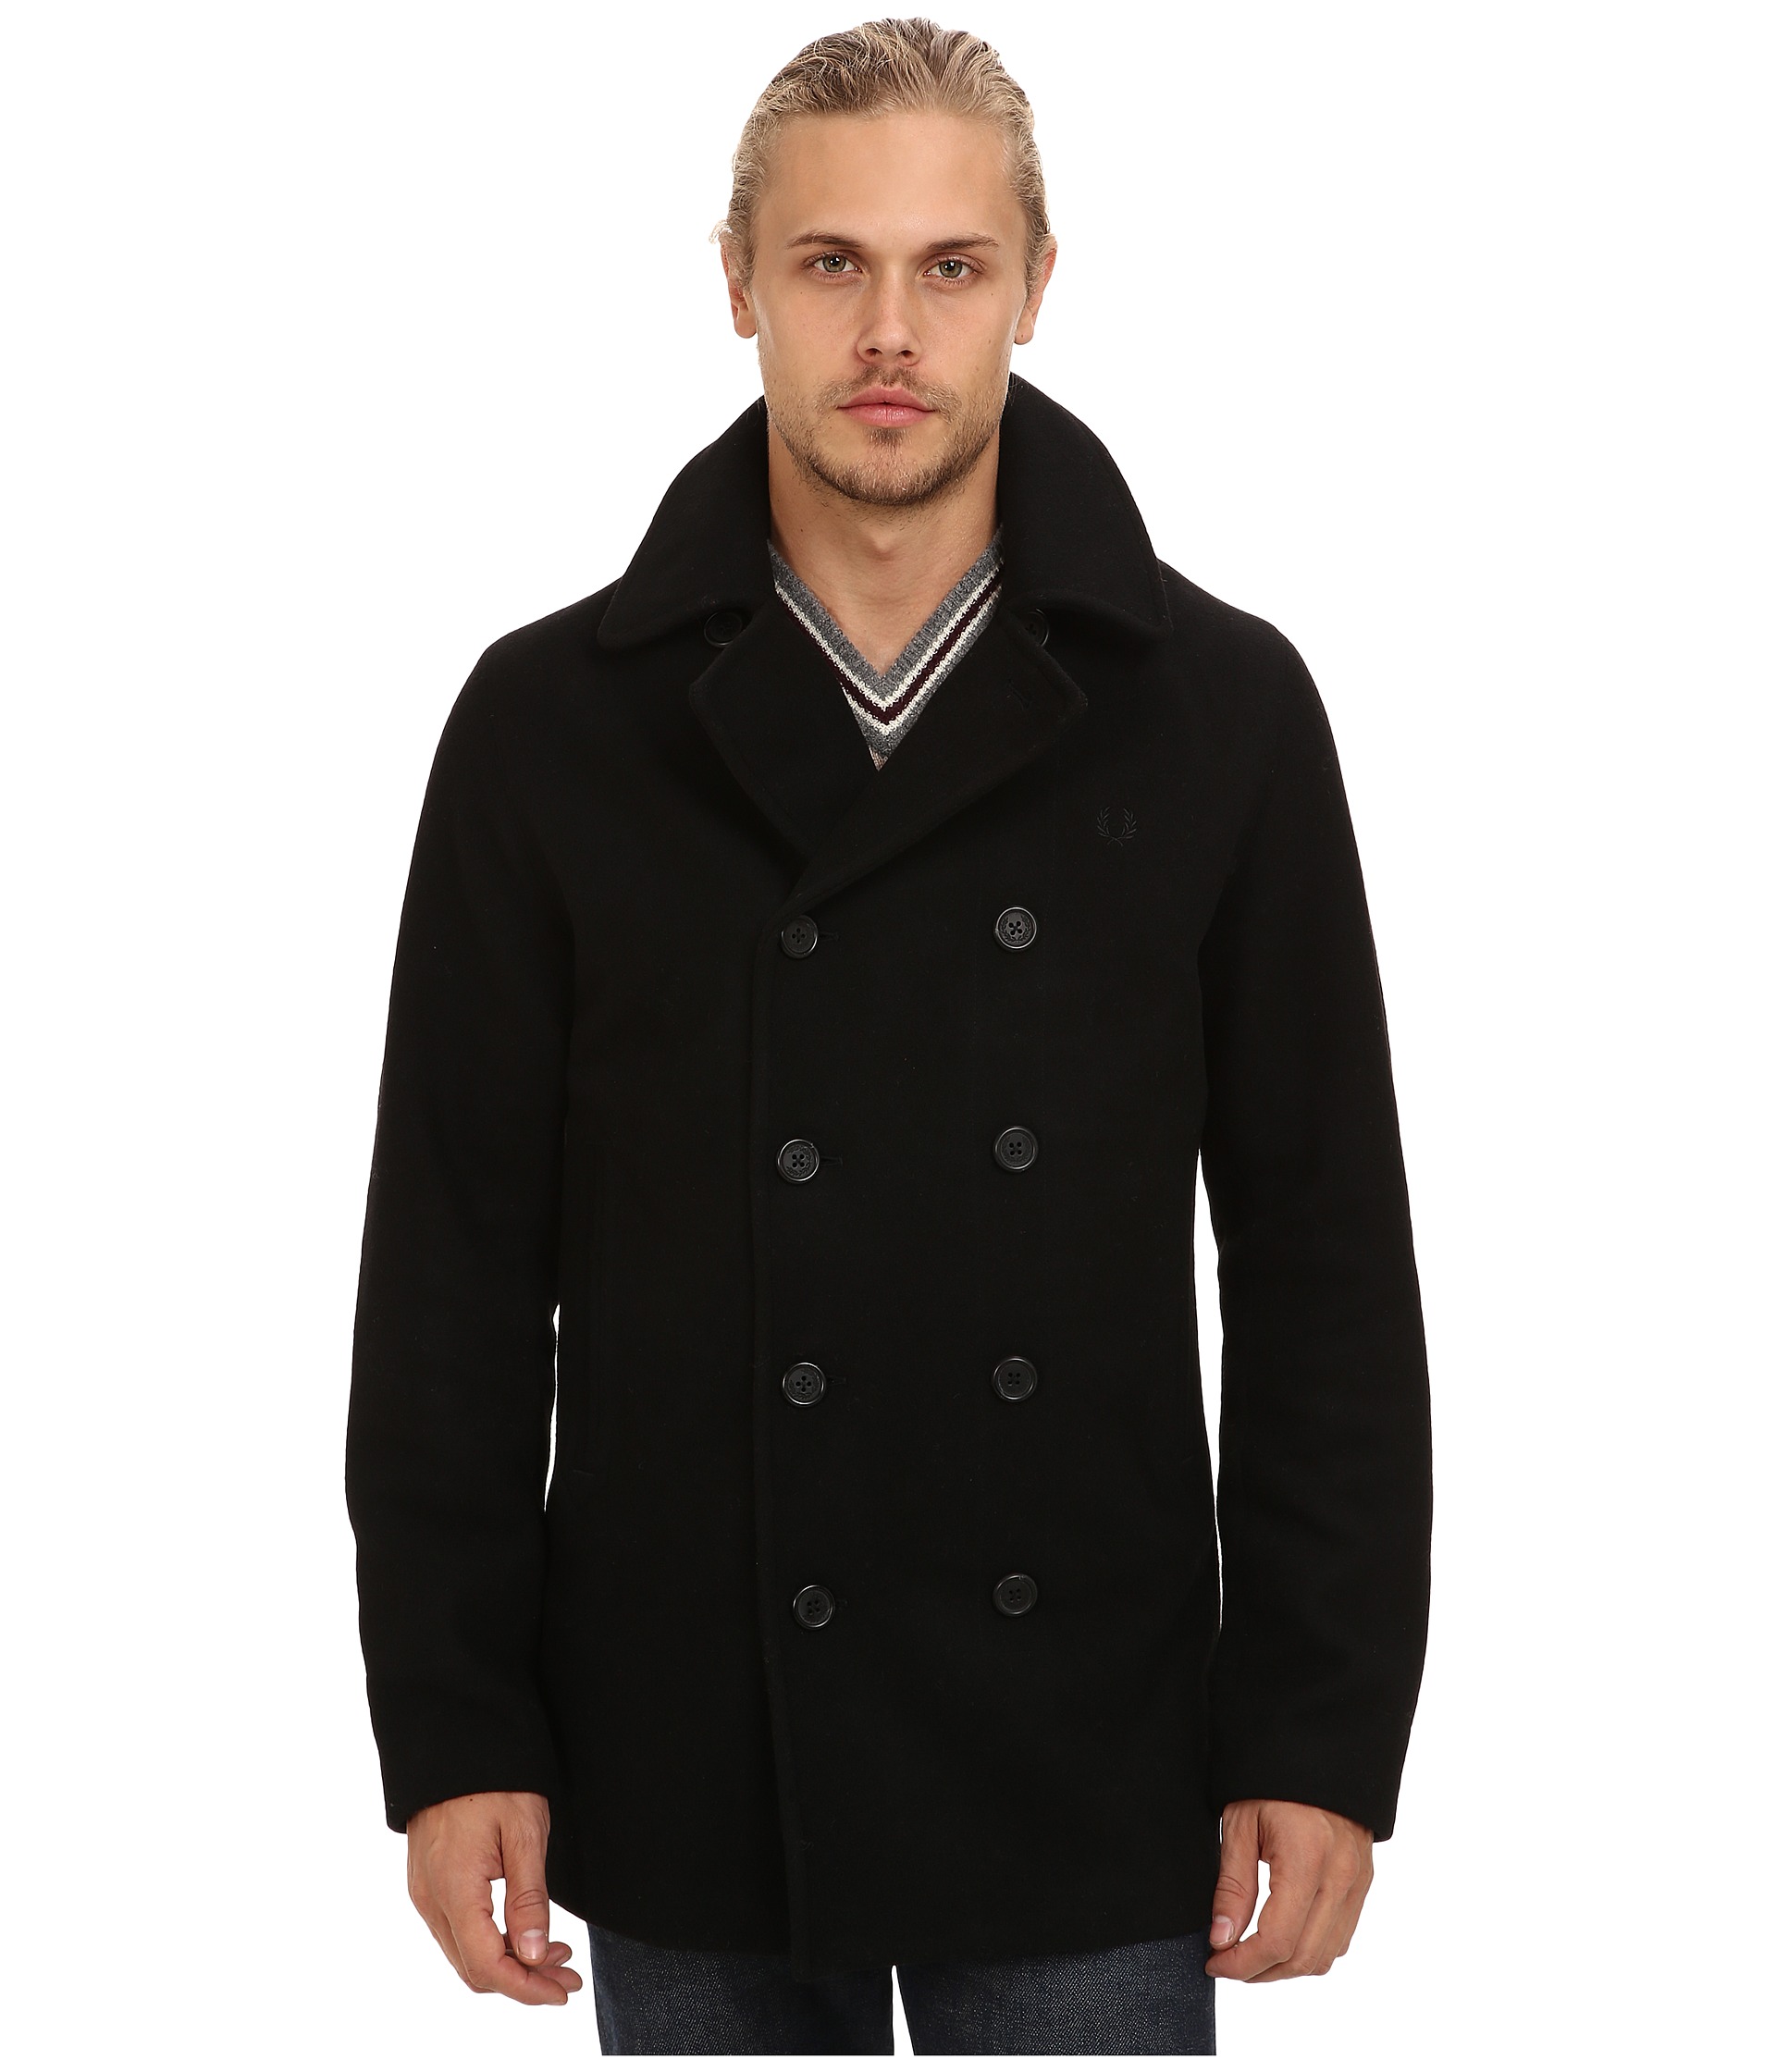 Fred Perry Wool Pea Coat, Clothing | Shipped Free at Zappos